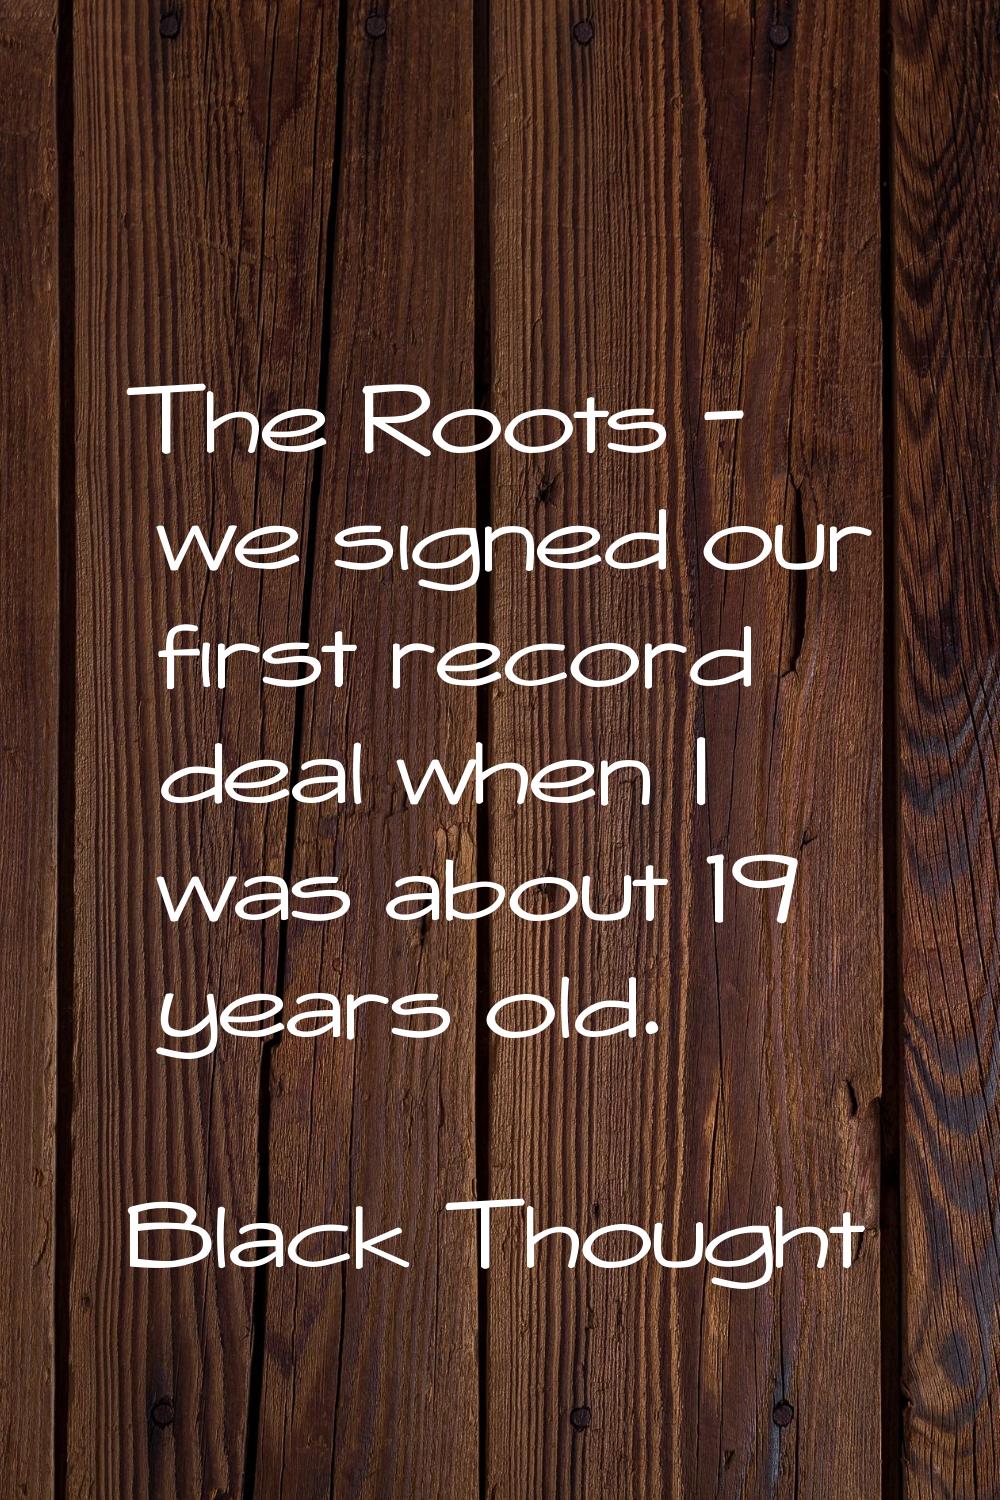 The Roots - we signed our first record deal when I was about 19 years old.